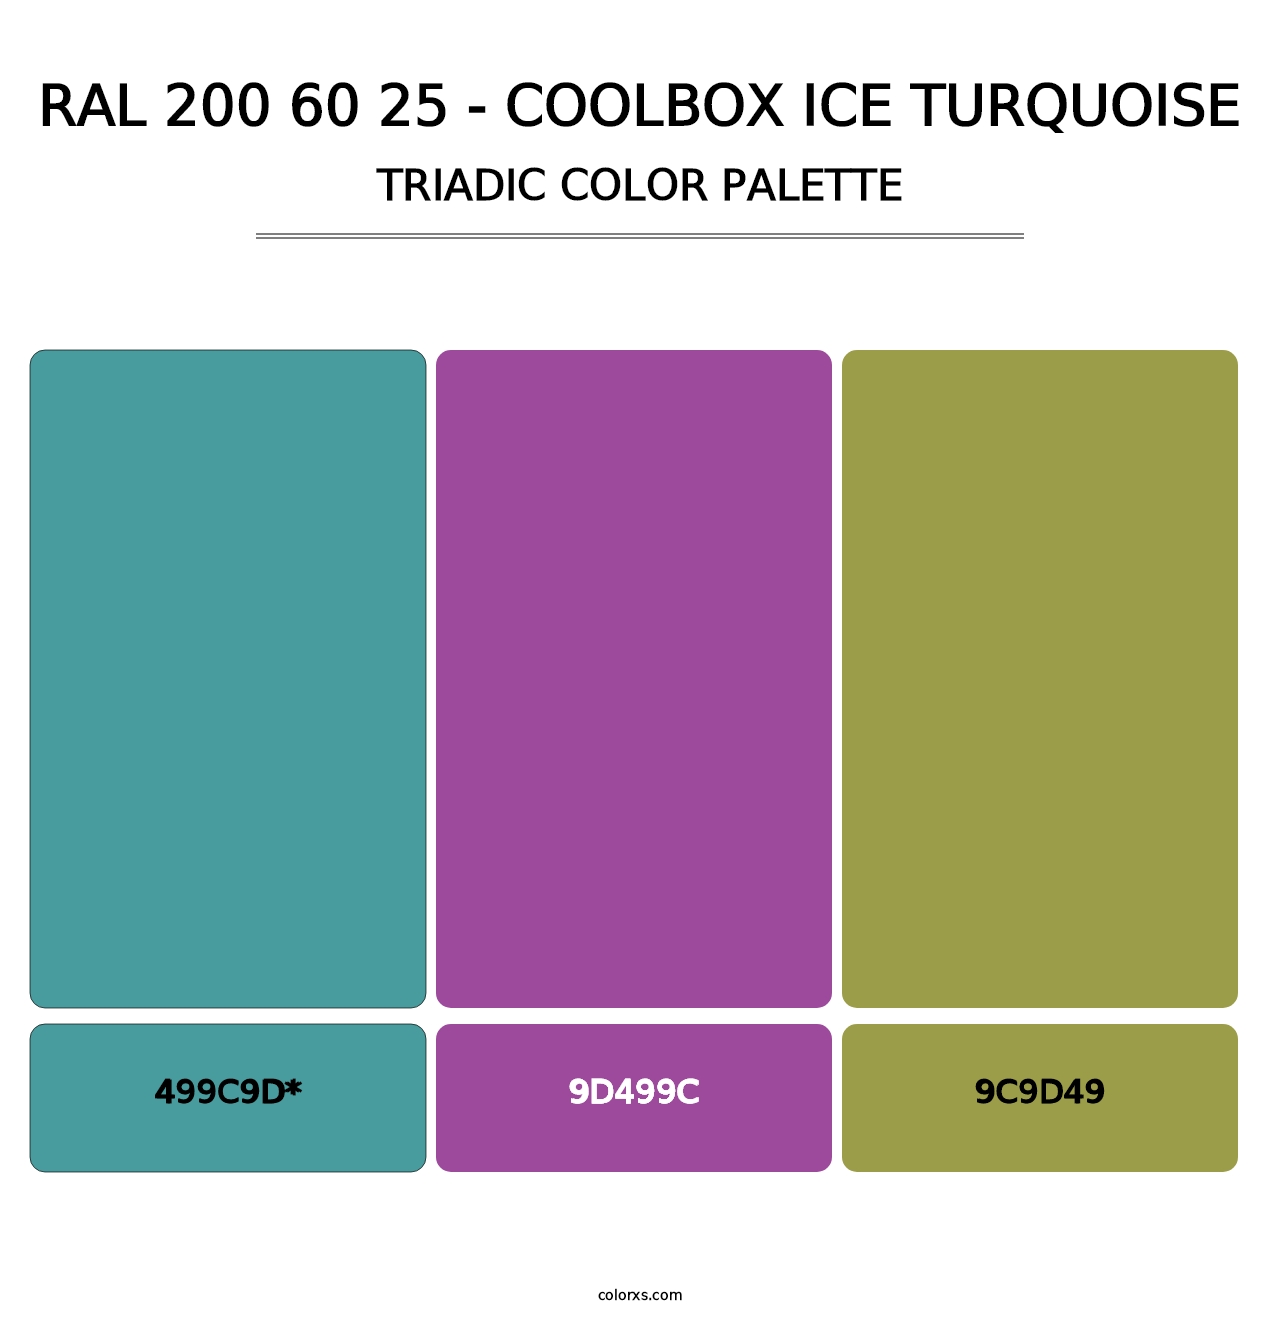 RAL 200 60 25 - Coolbox Ice Turquoise - Triadic Color Palette